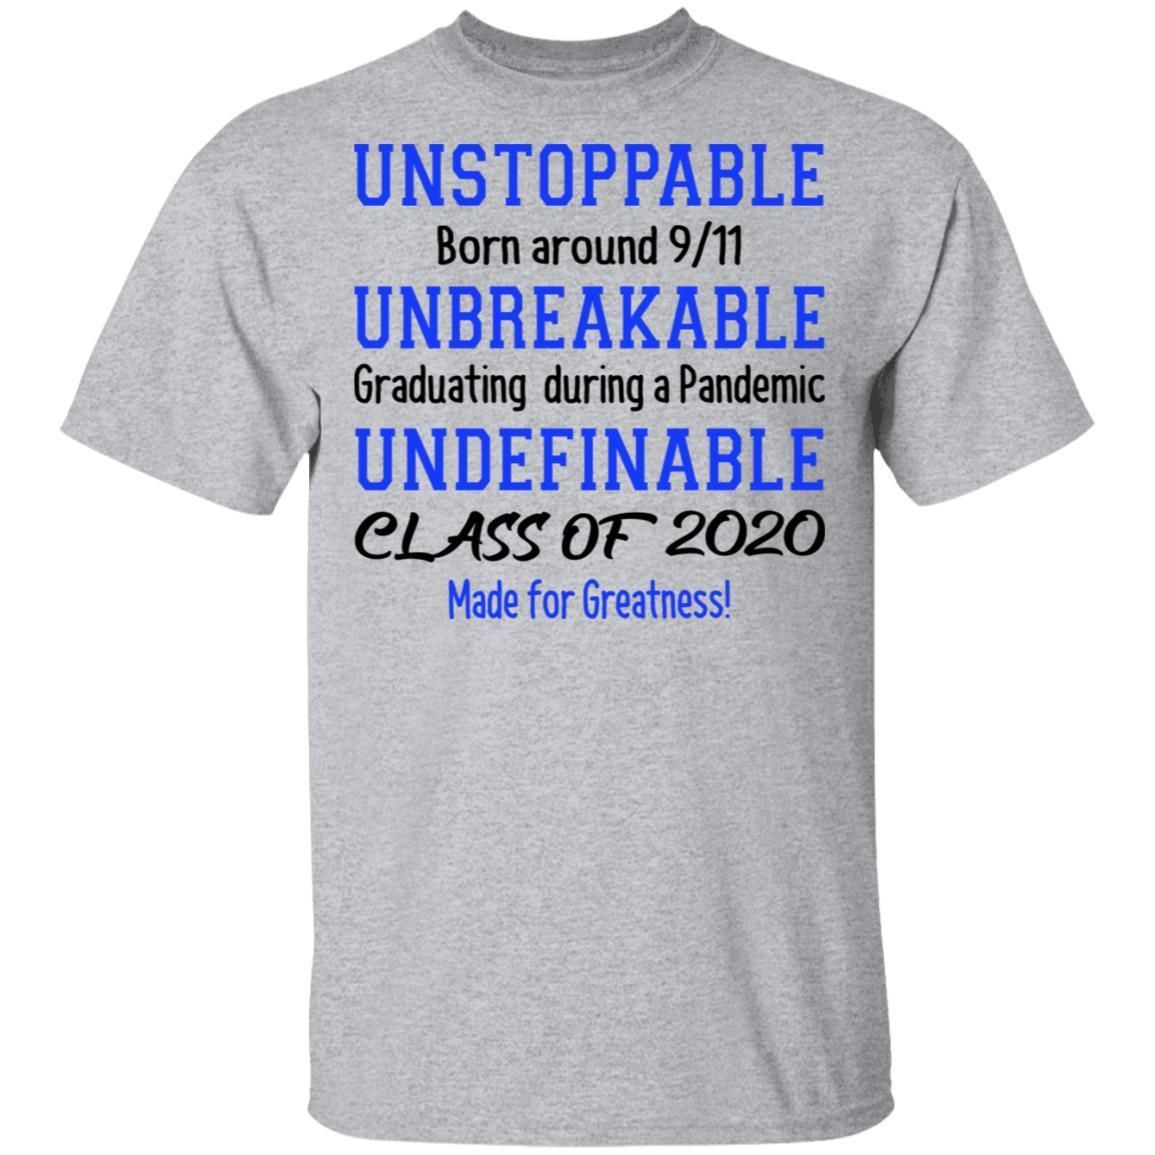 Unstoppable Born Around 9-11 Unbreakable Graduating Class of 2020 shirts